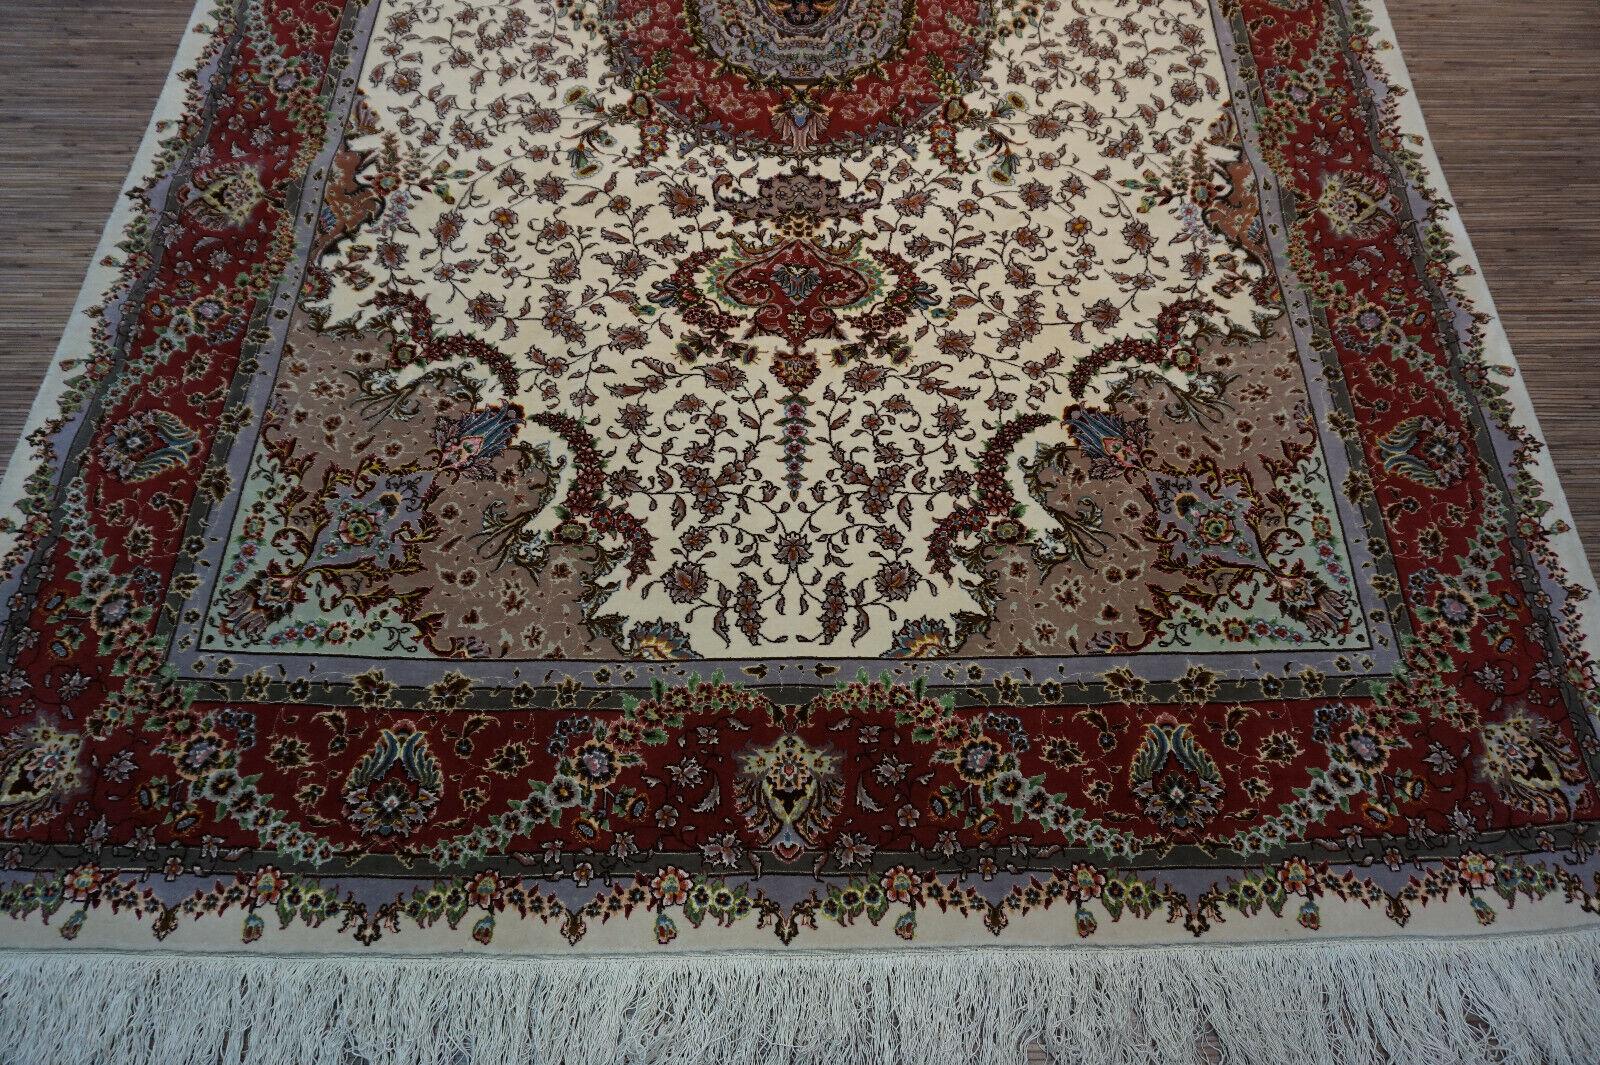 Handmade Vintage Persian Style Tabriz Rug With Silk 6.5' x 10', 1980s - 1D63 For Sale 3